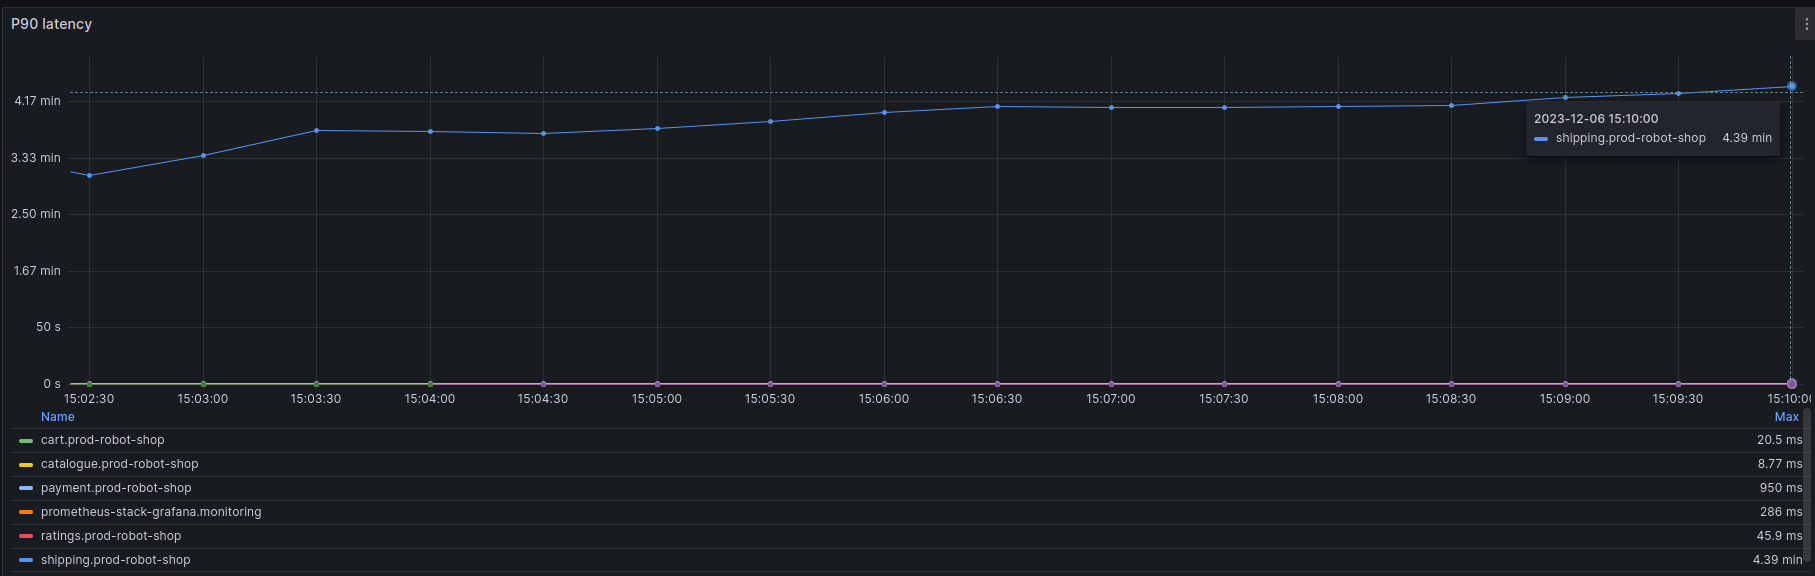 Greater uptick in P90 latency for shipping service via Grafana Dashboard